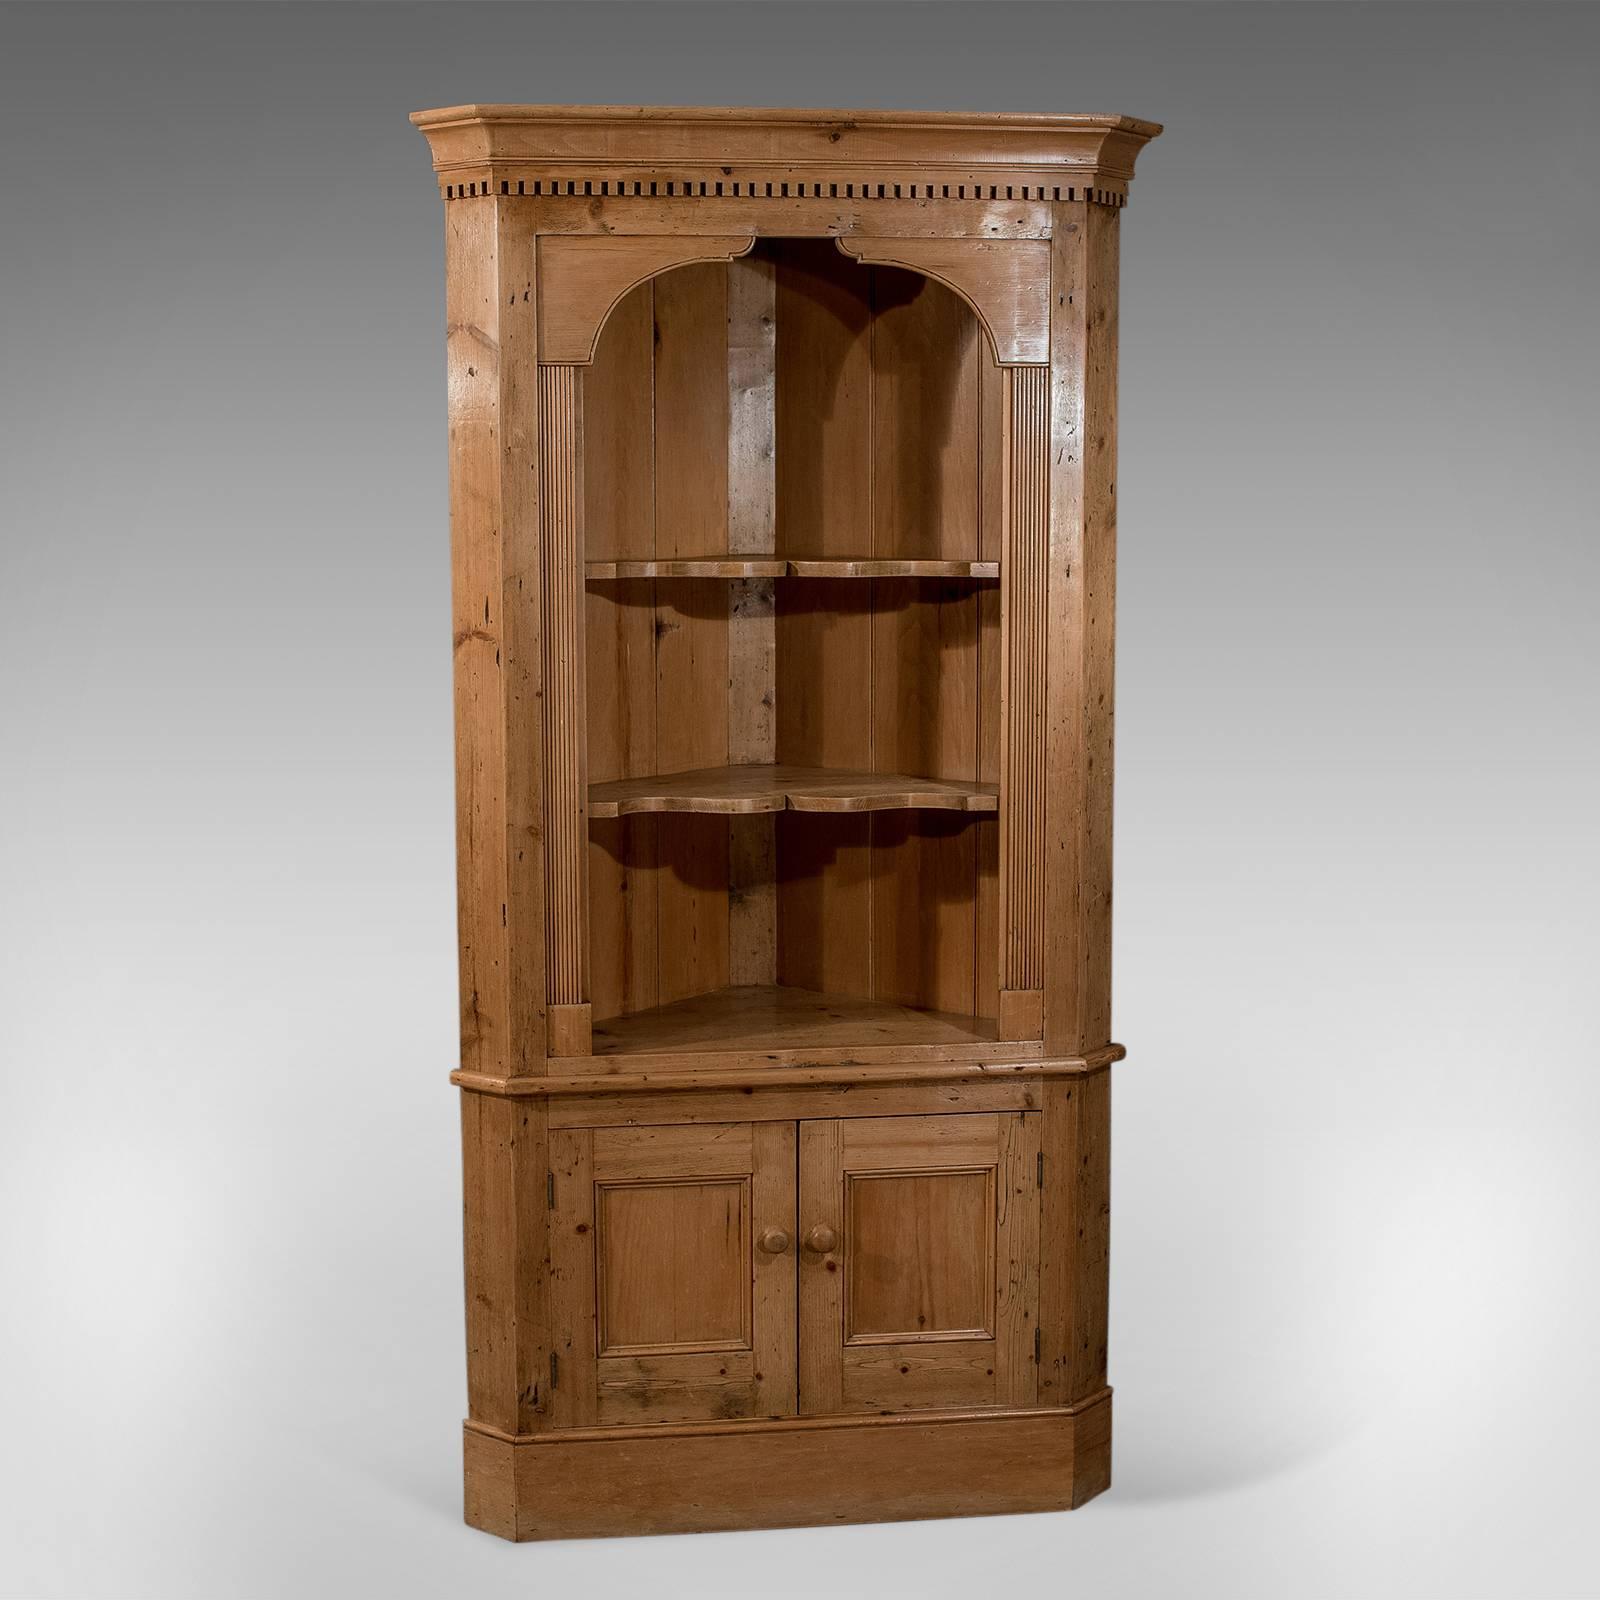 Early 20th Century Antique Victorian Pine Tall Corner Wall Cupboard Cabinet, circa 1900